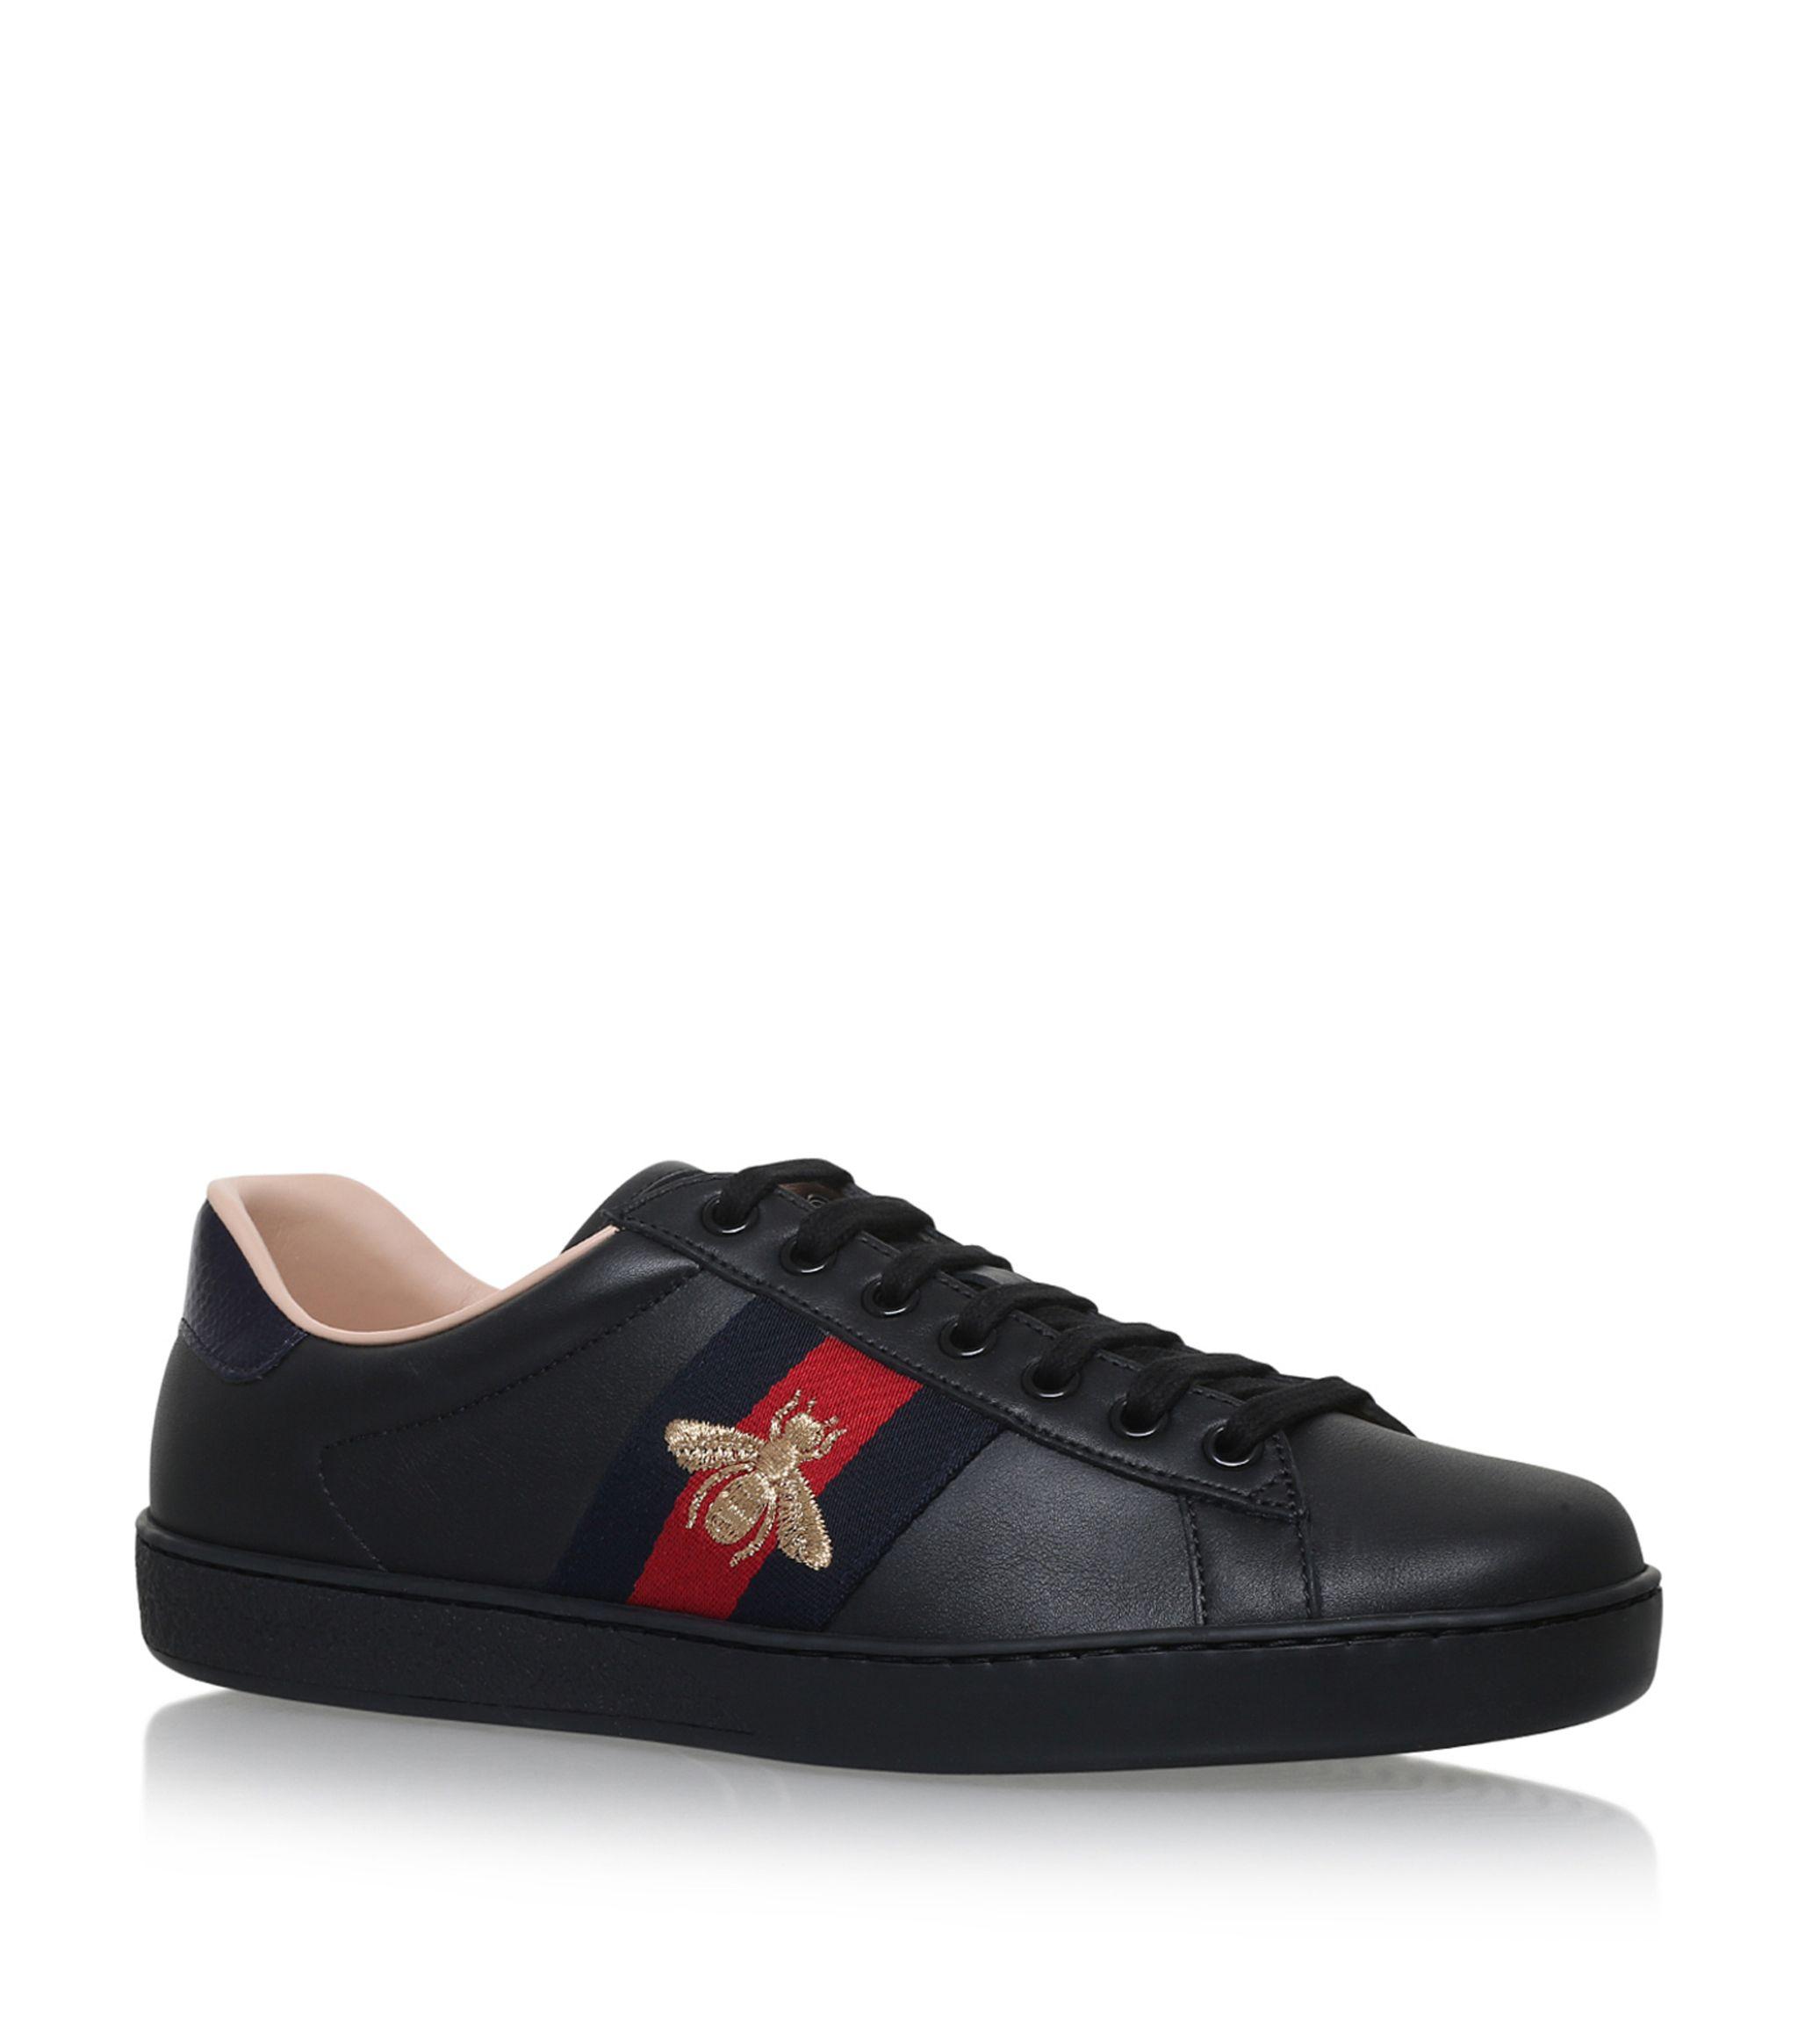 Gucci Leather Ace Bee Sneakers for Men - Lyst